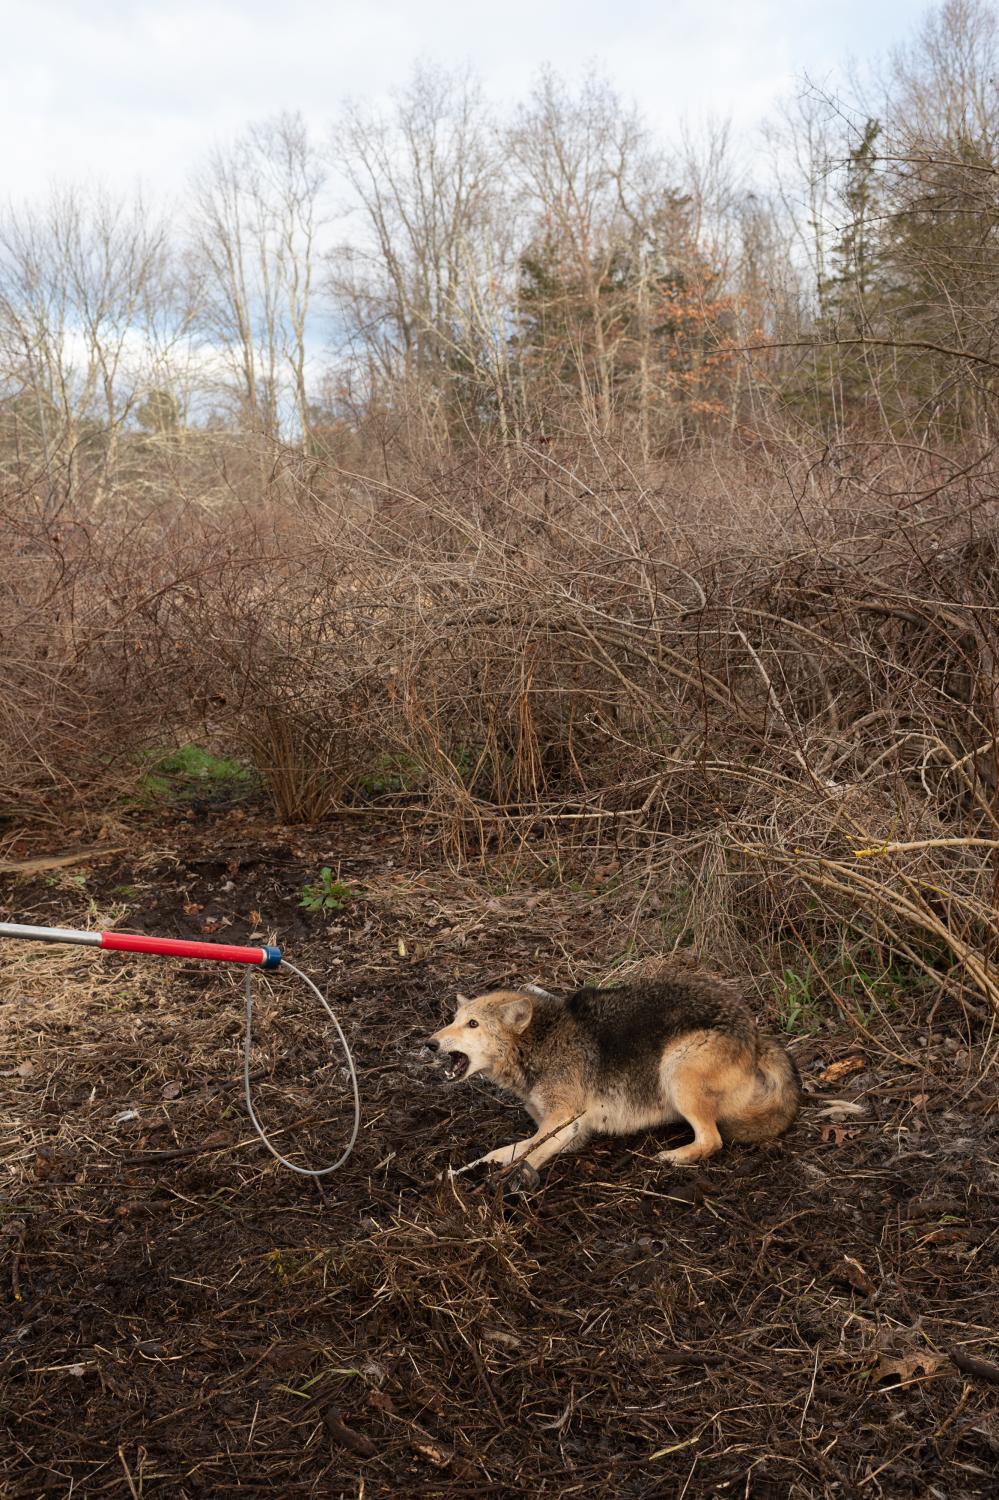 It Takes a Village - Using a catchpole to capture a coyote.